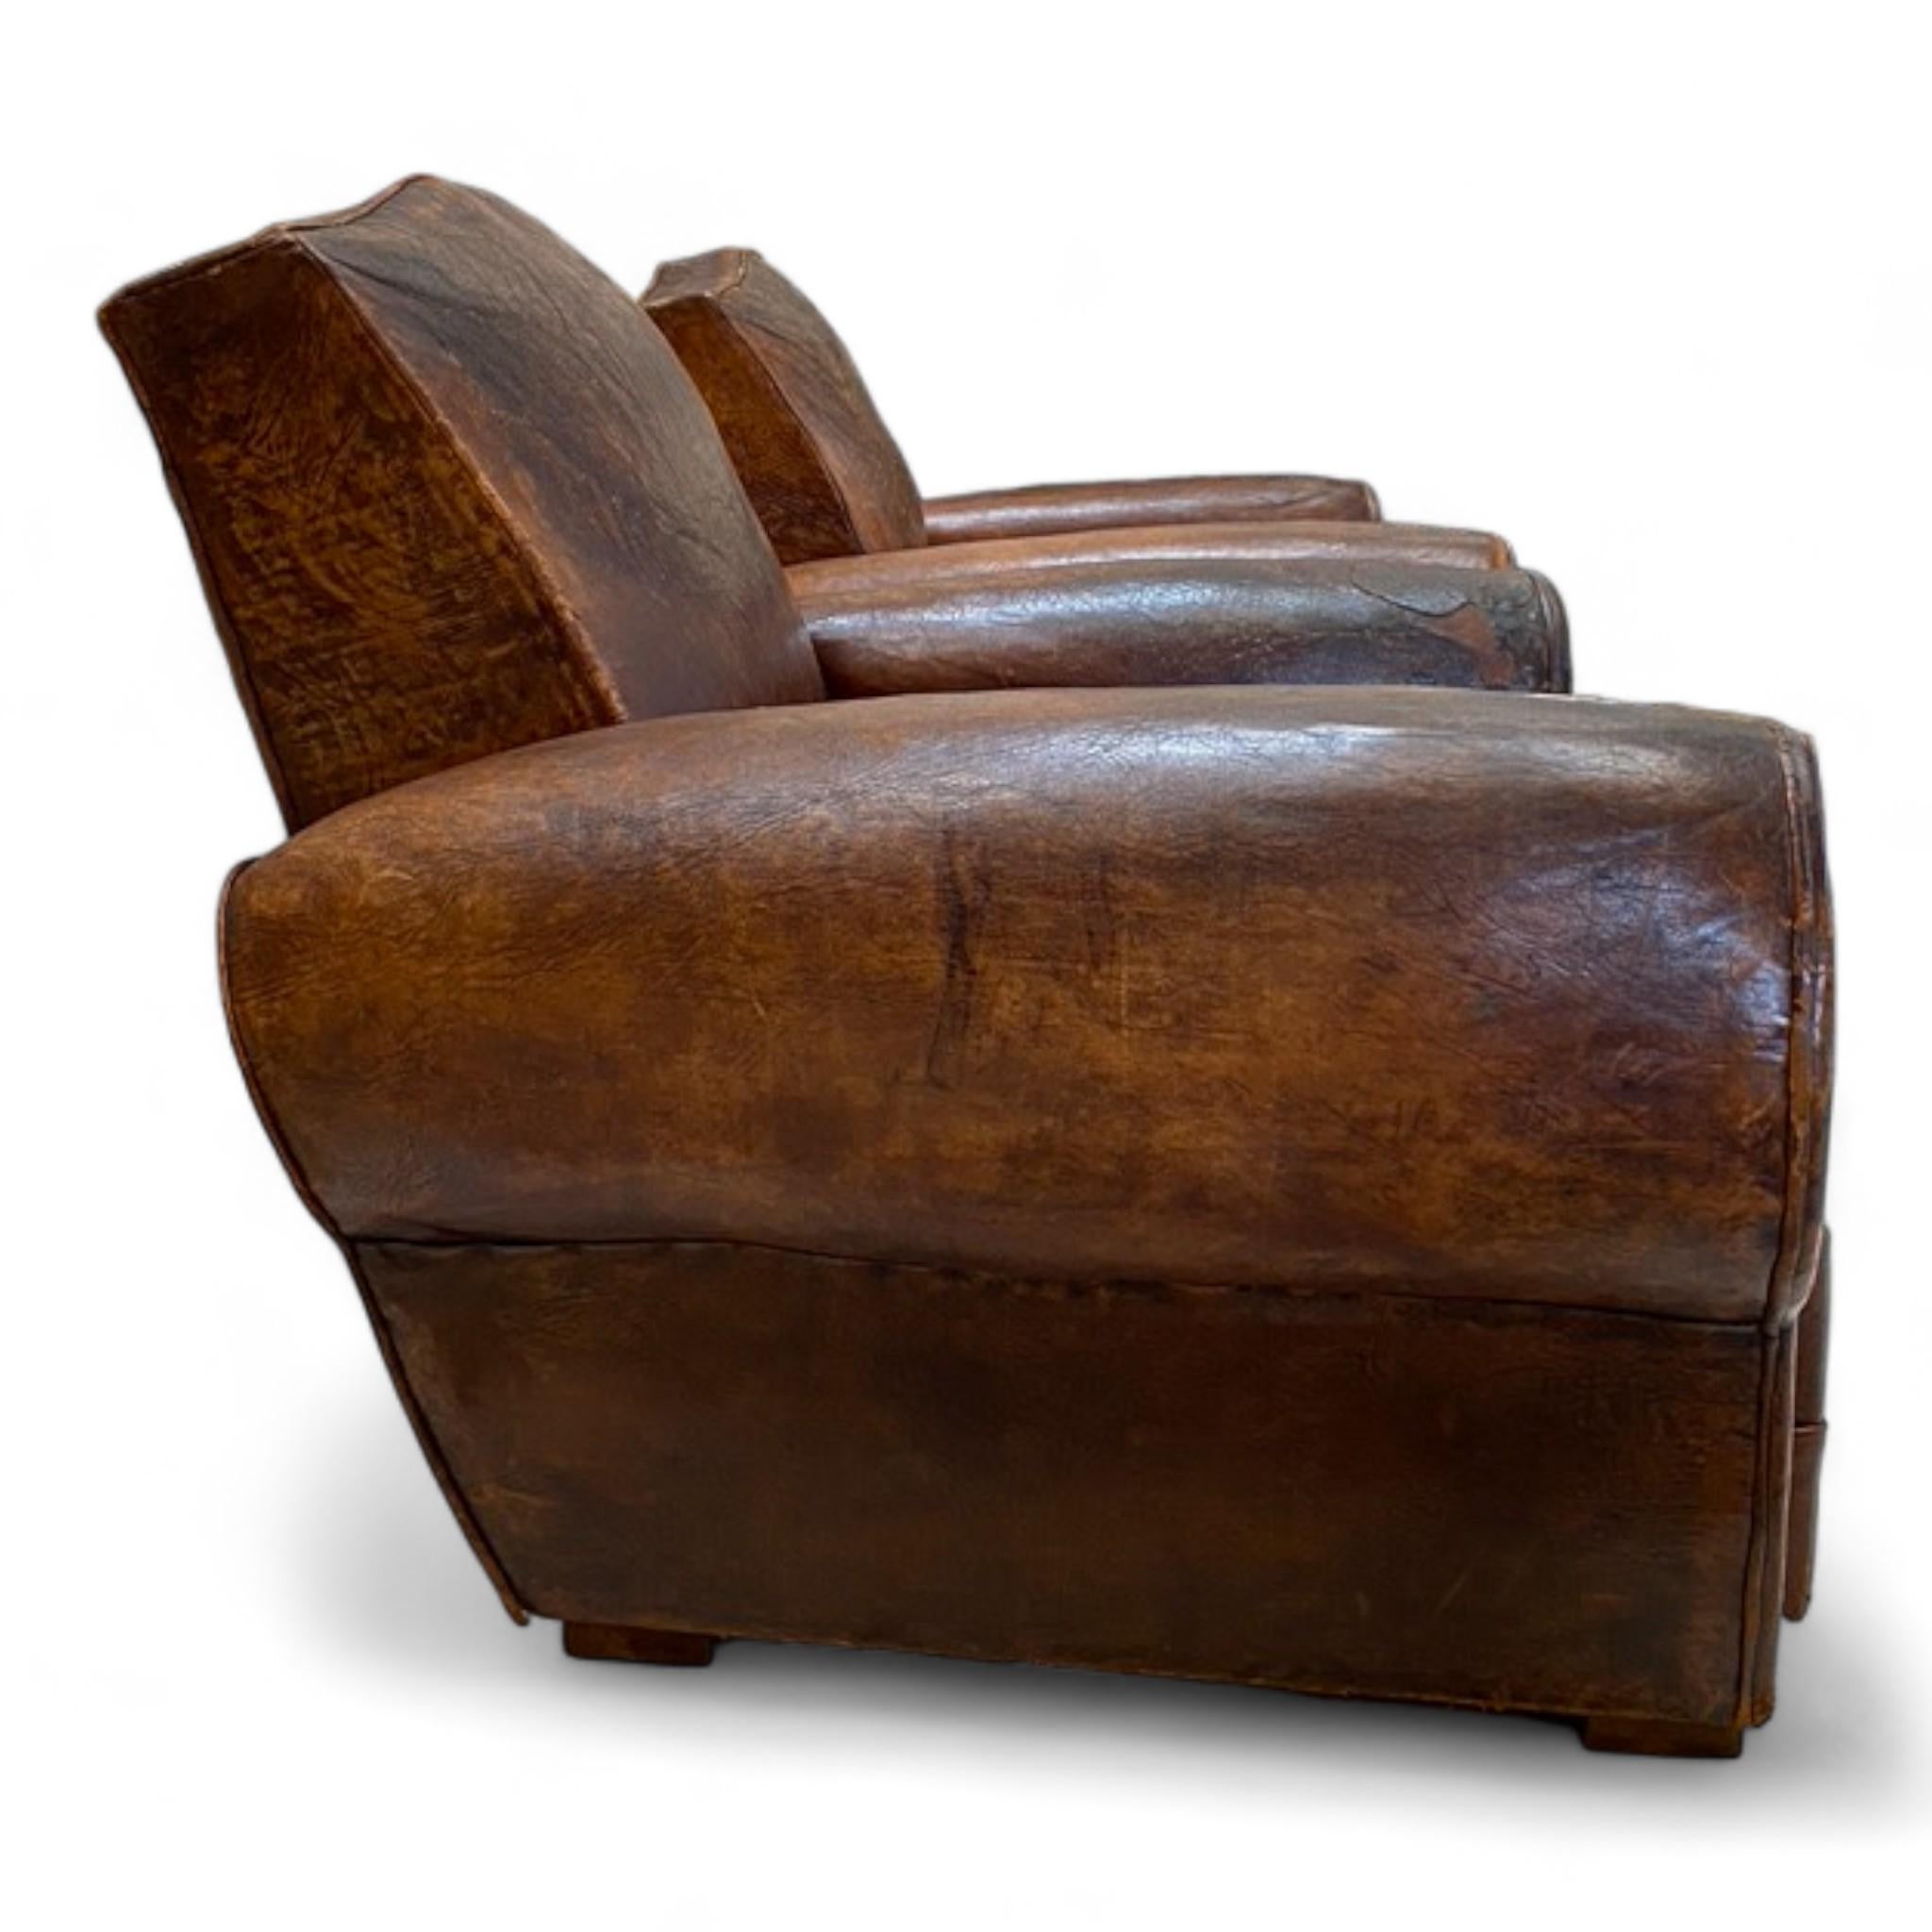 These 1930s French Leather Club Chairs are upholstered with high quality leather in good vintage condition with well-worn character. 
Featuring iconic cigar style arms and unique moustache-shaped back, these chairs are always a favorite among